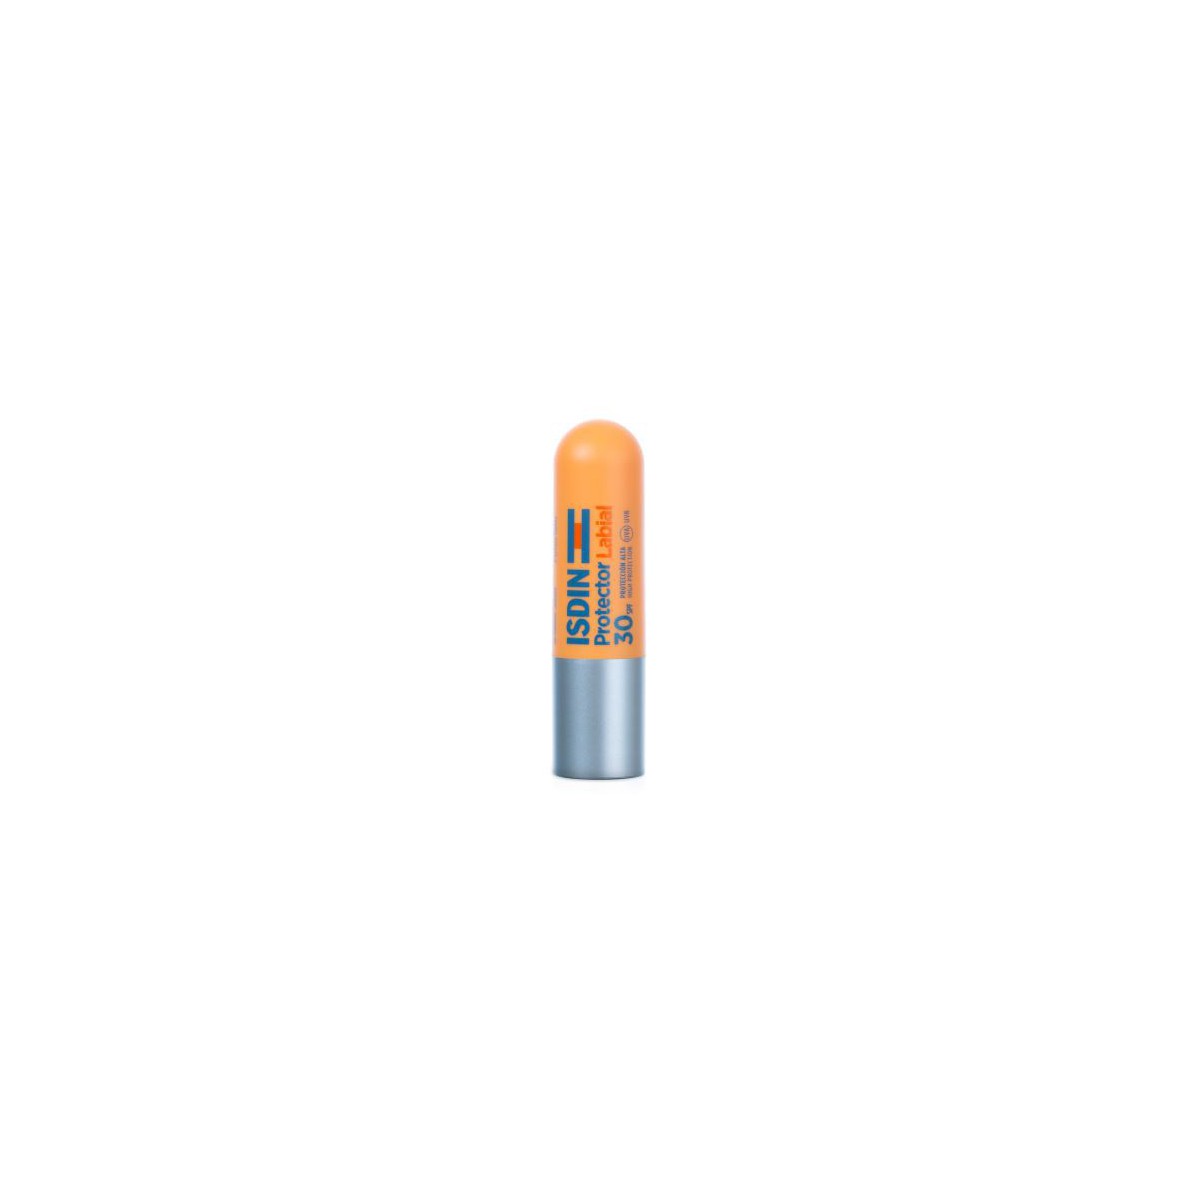 ISDIN PROTECTOR LABIAL 30SP